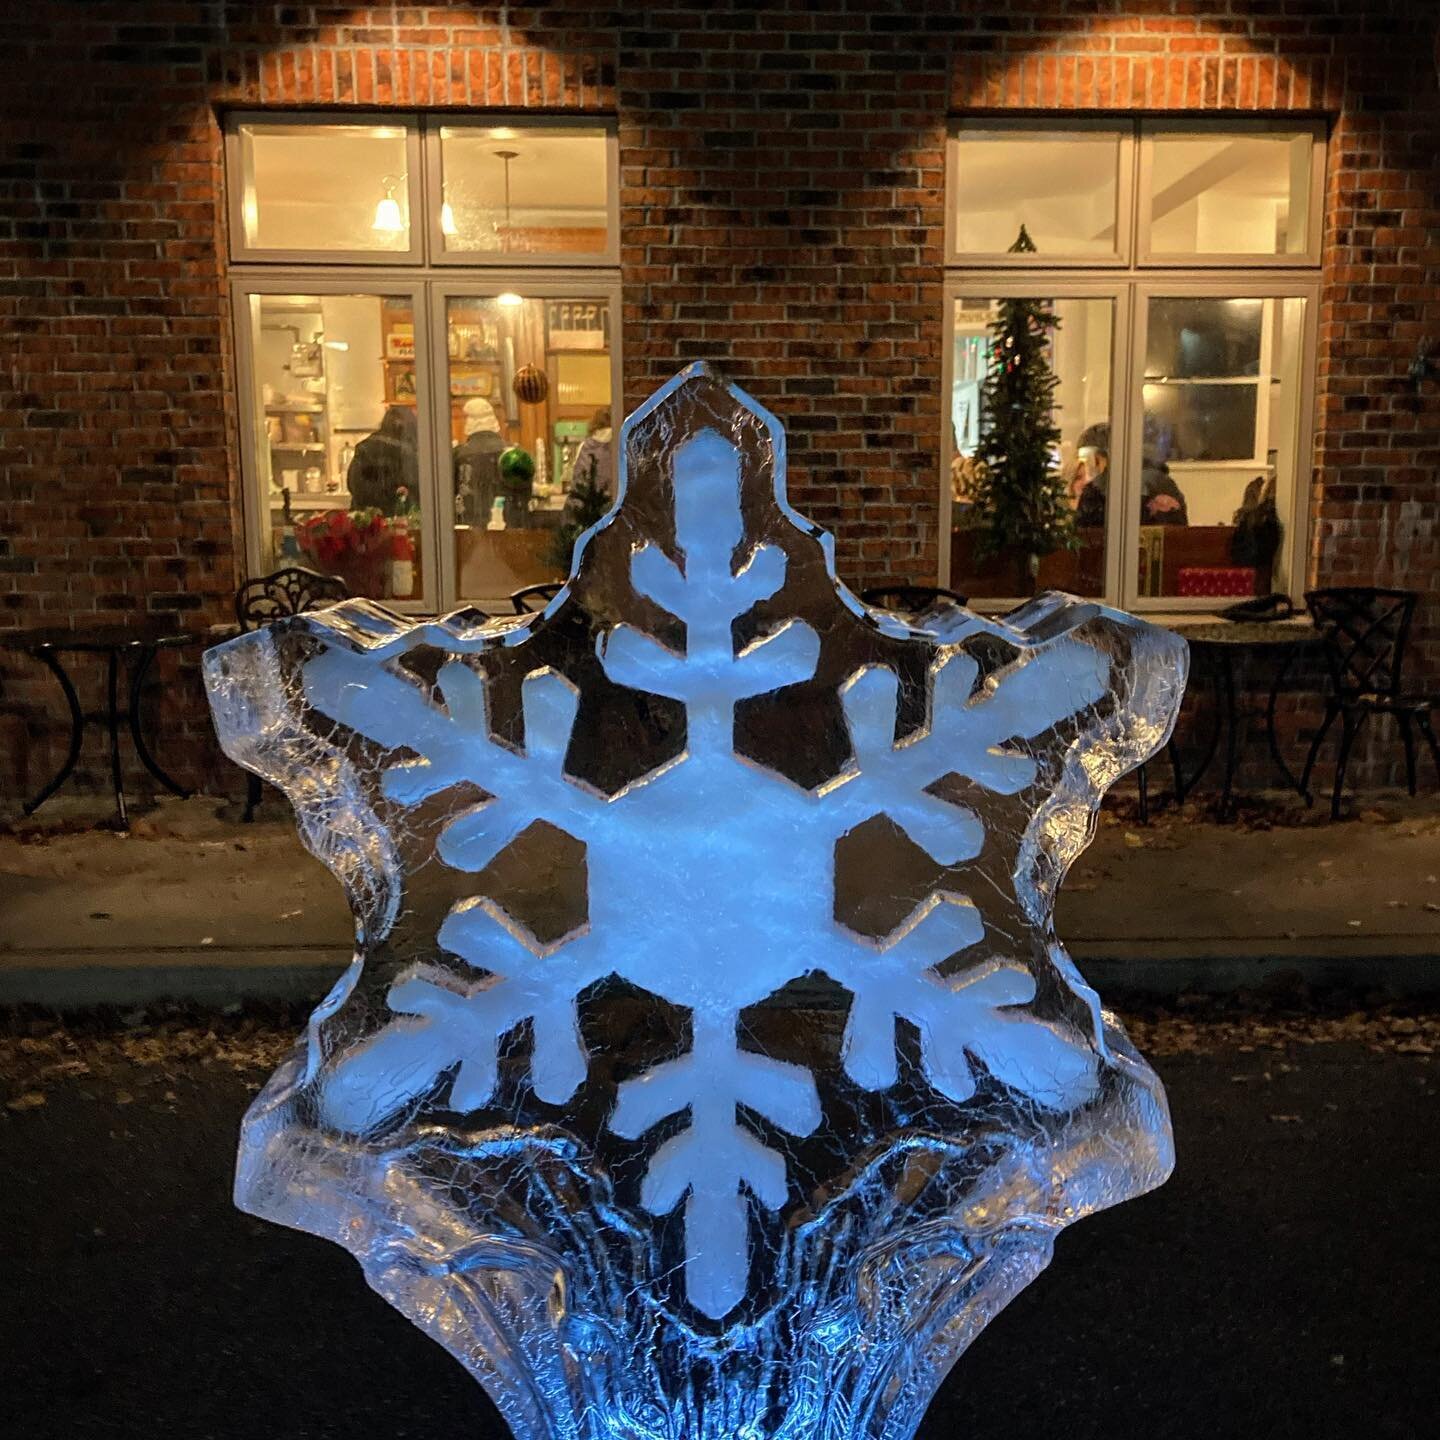 ❄️ #IceIceBerlin was so festive &amp; fun tonight! 🤩 Come check out all the gorgeous #icesculptures tomorrow for #SmallBusinessSaturday!